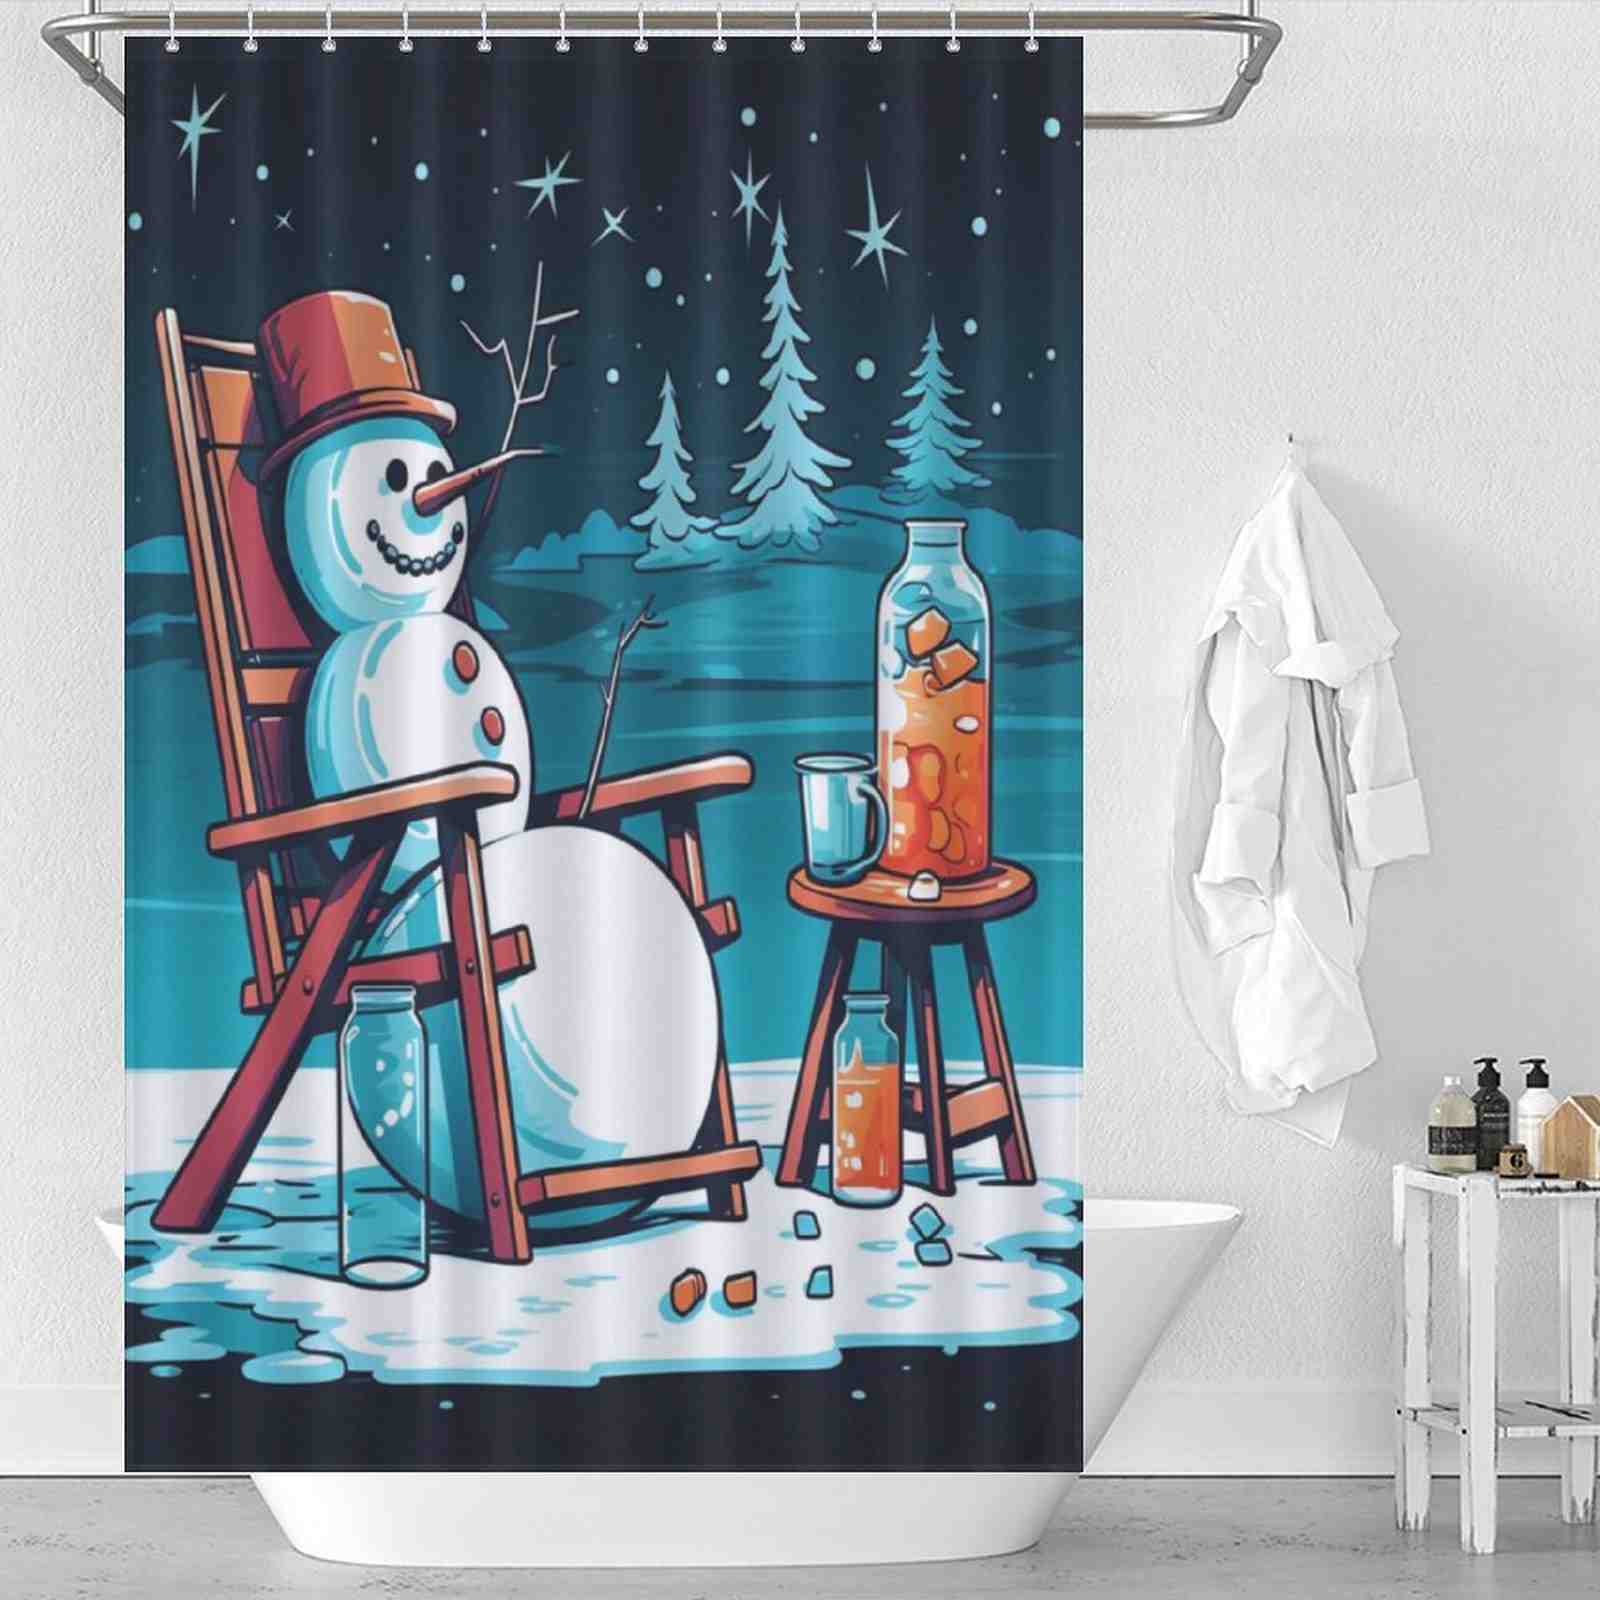 This Funny Snowman Juice Christmas Shower Curtain from Cotton Cat features a snowman sitting in a rocking chair, adding a touch of whimsy to your bathroom.